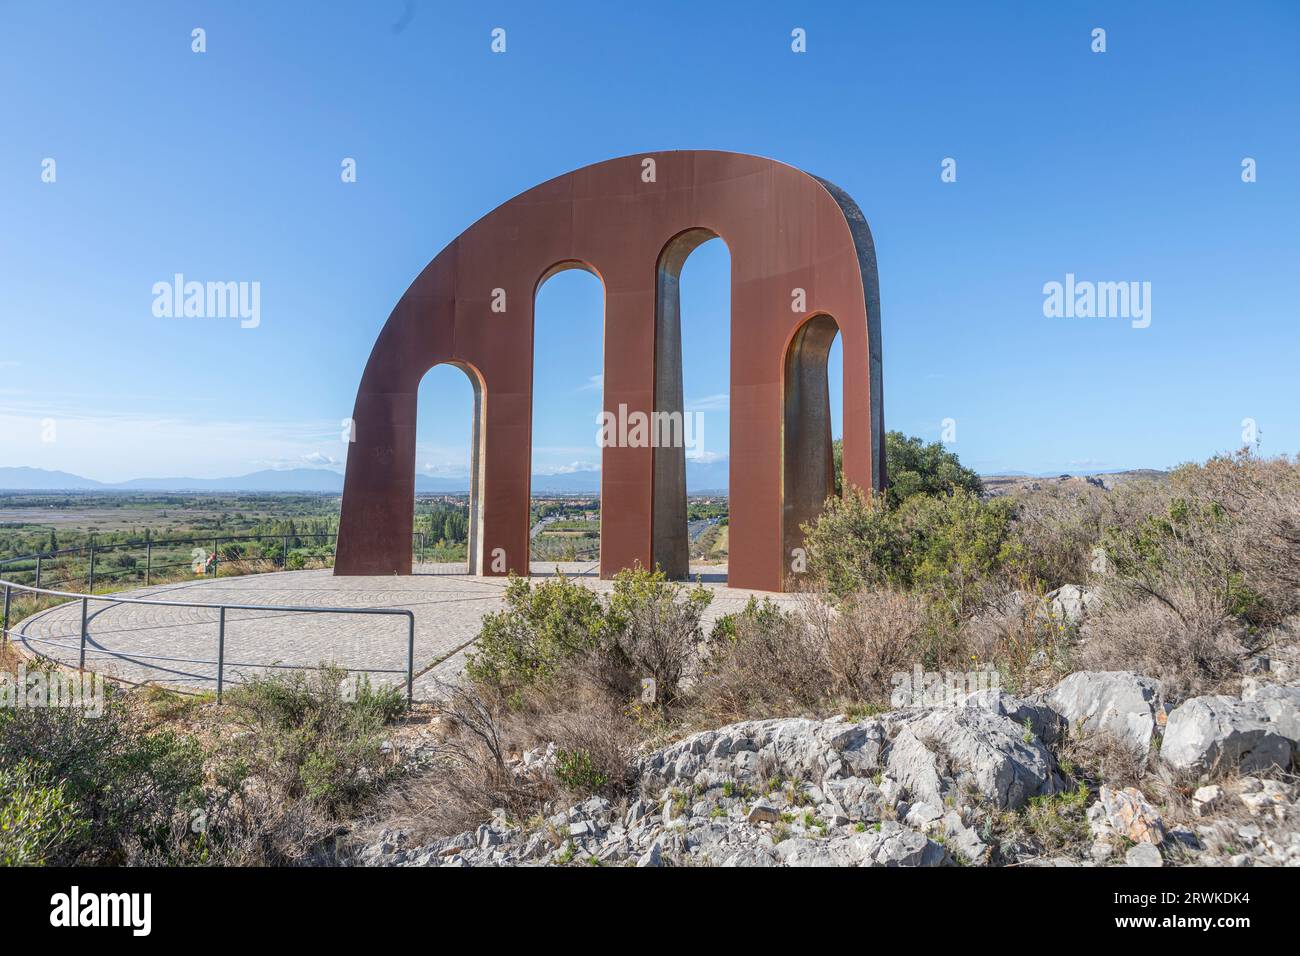 The Gate of the Catalan Countries is a work of the sculptor Emili Armengol, and marks the Northern starting location of the Catalan Countries. Stock Photo